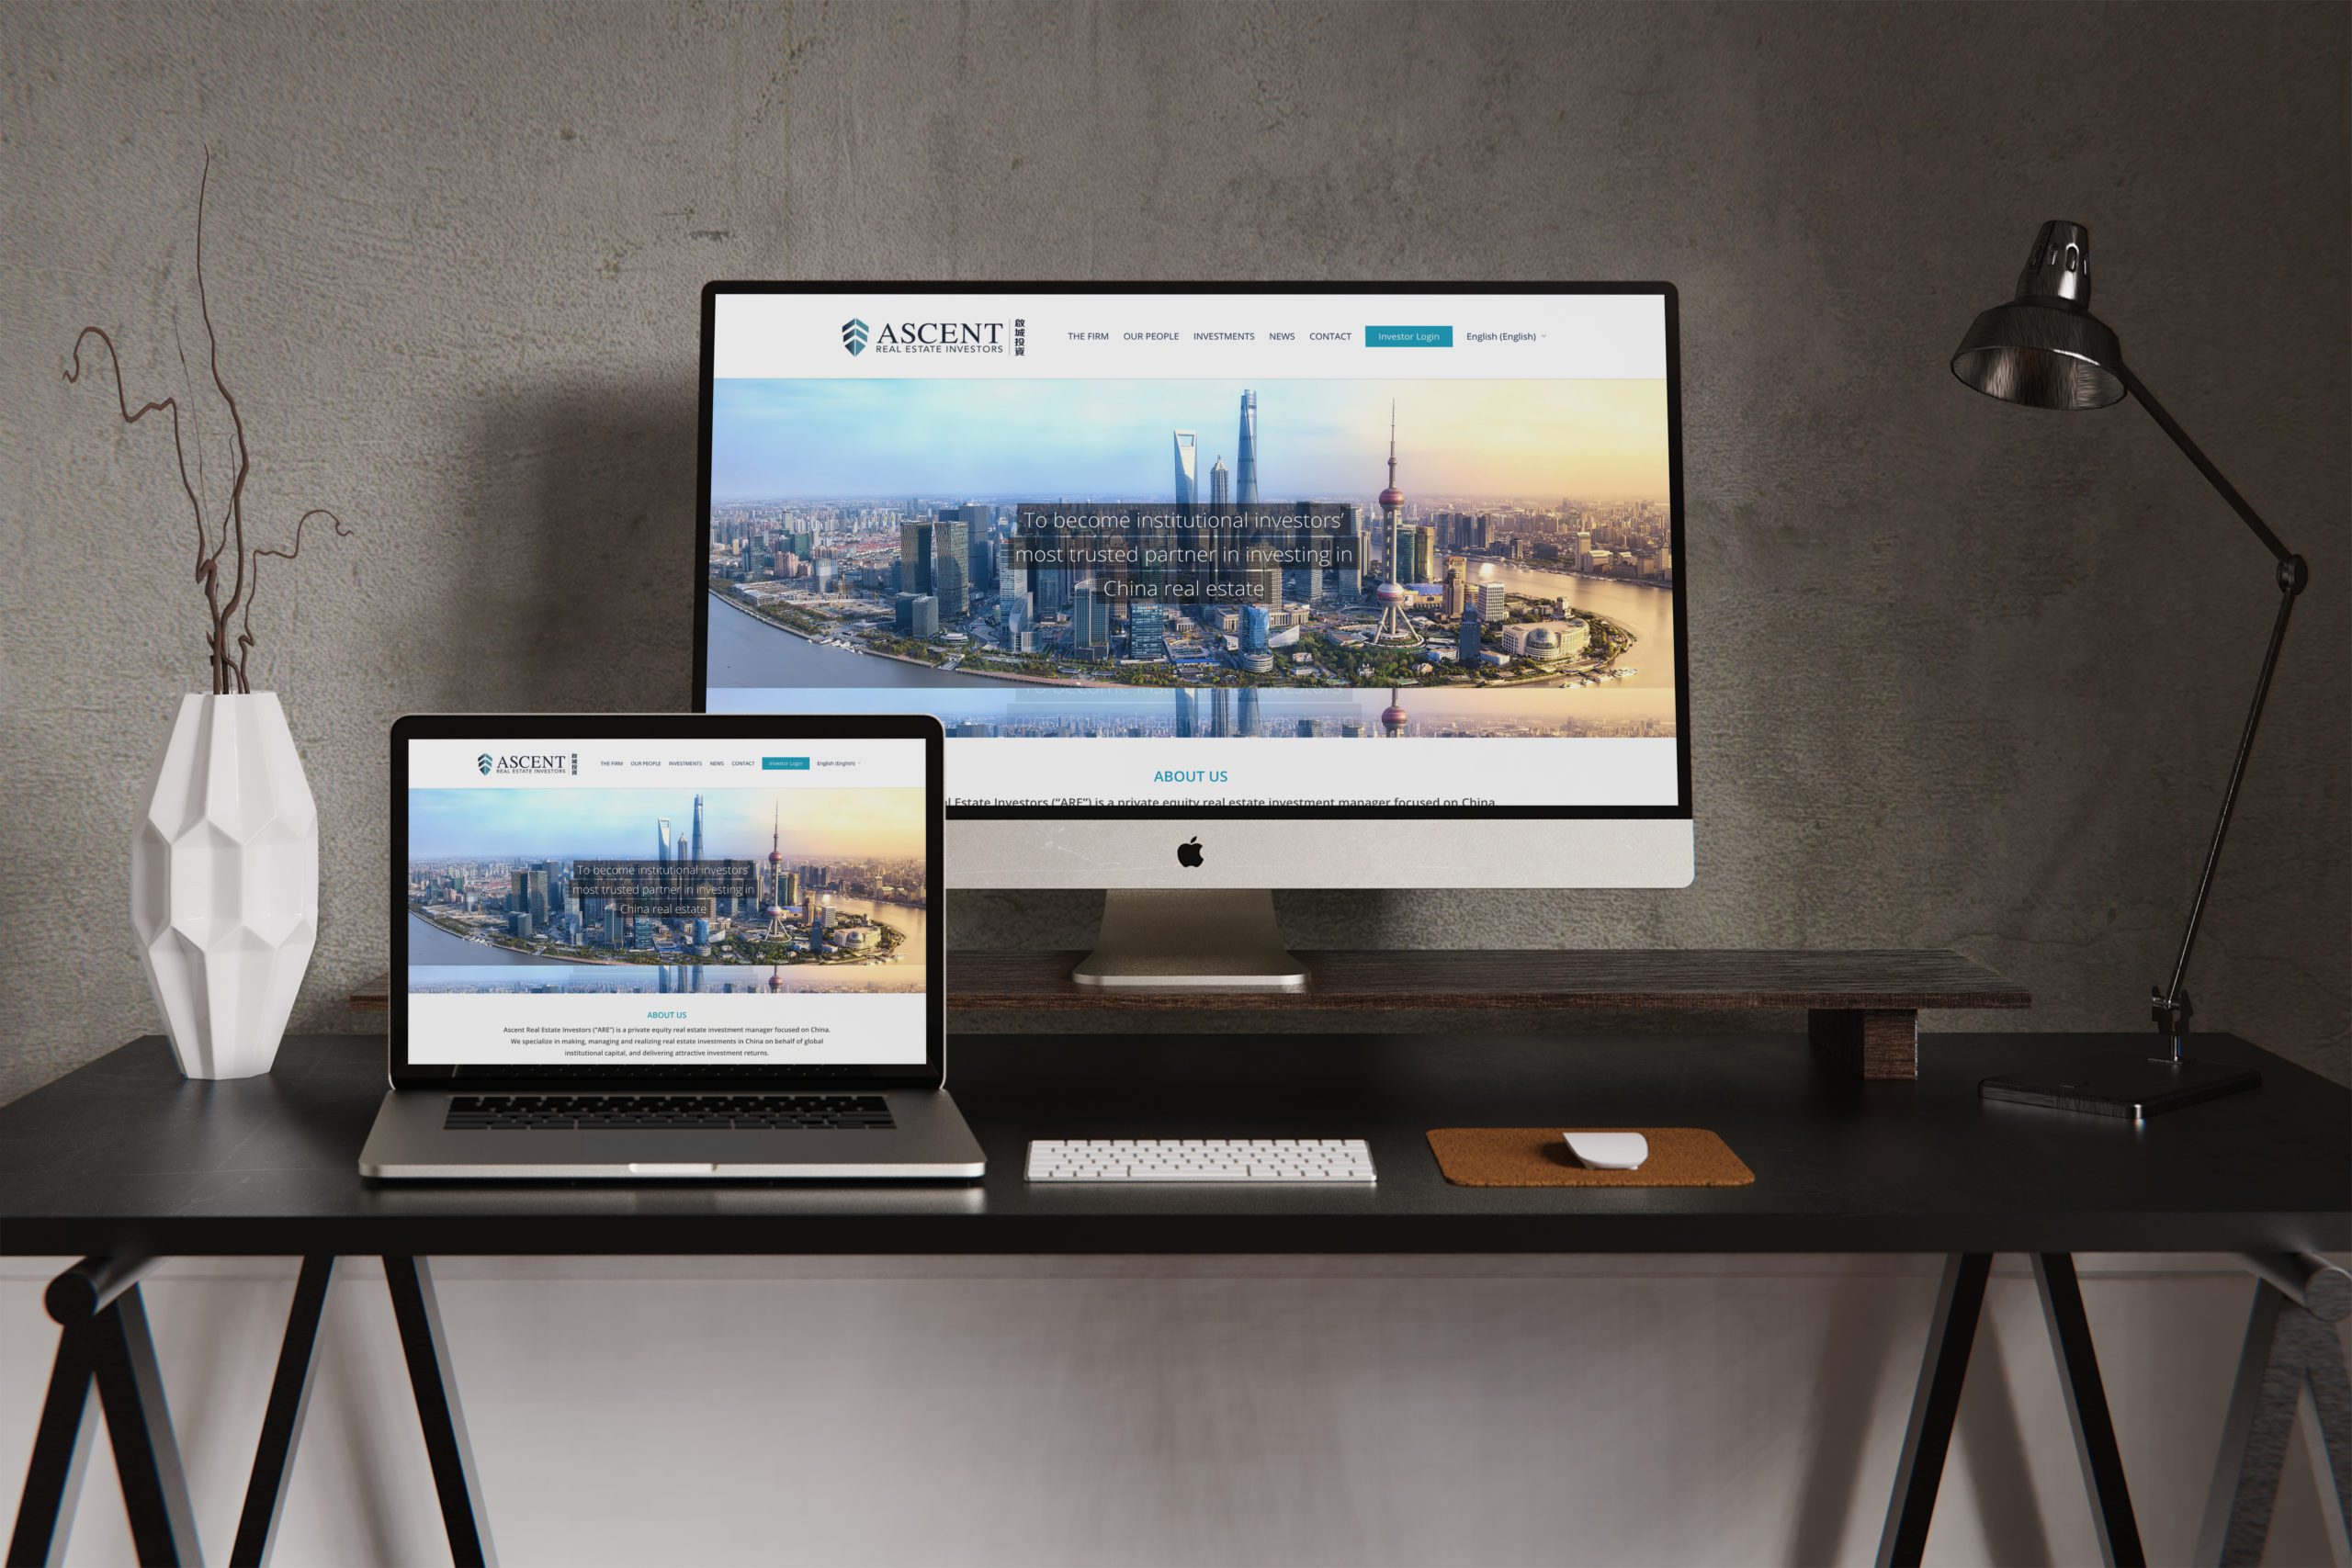 Ascent website shown on laptop and on desktop with a work desk background